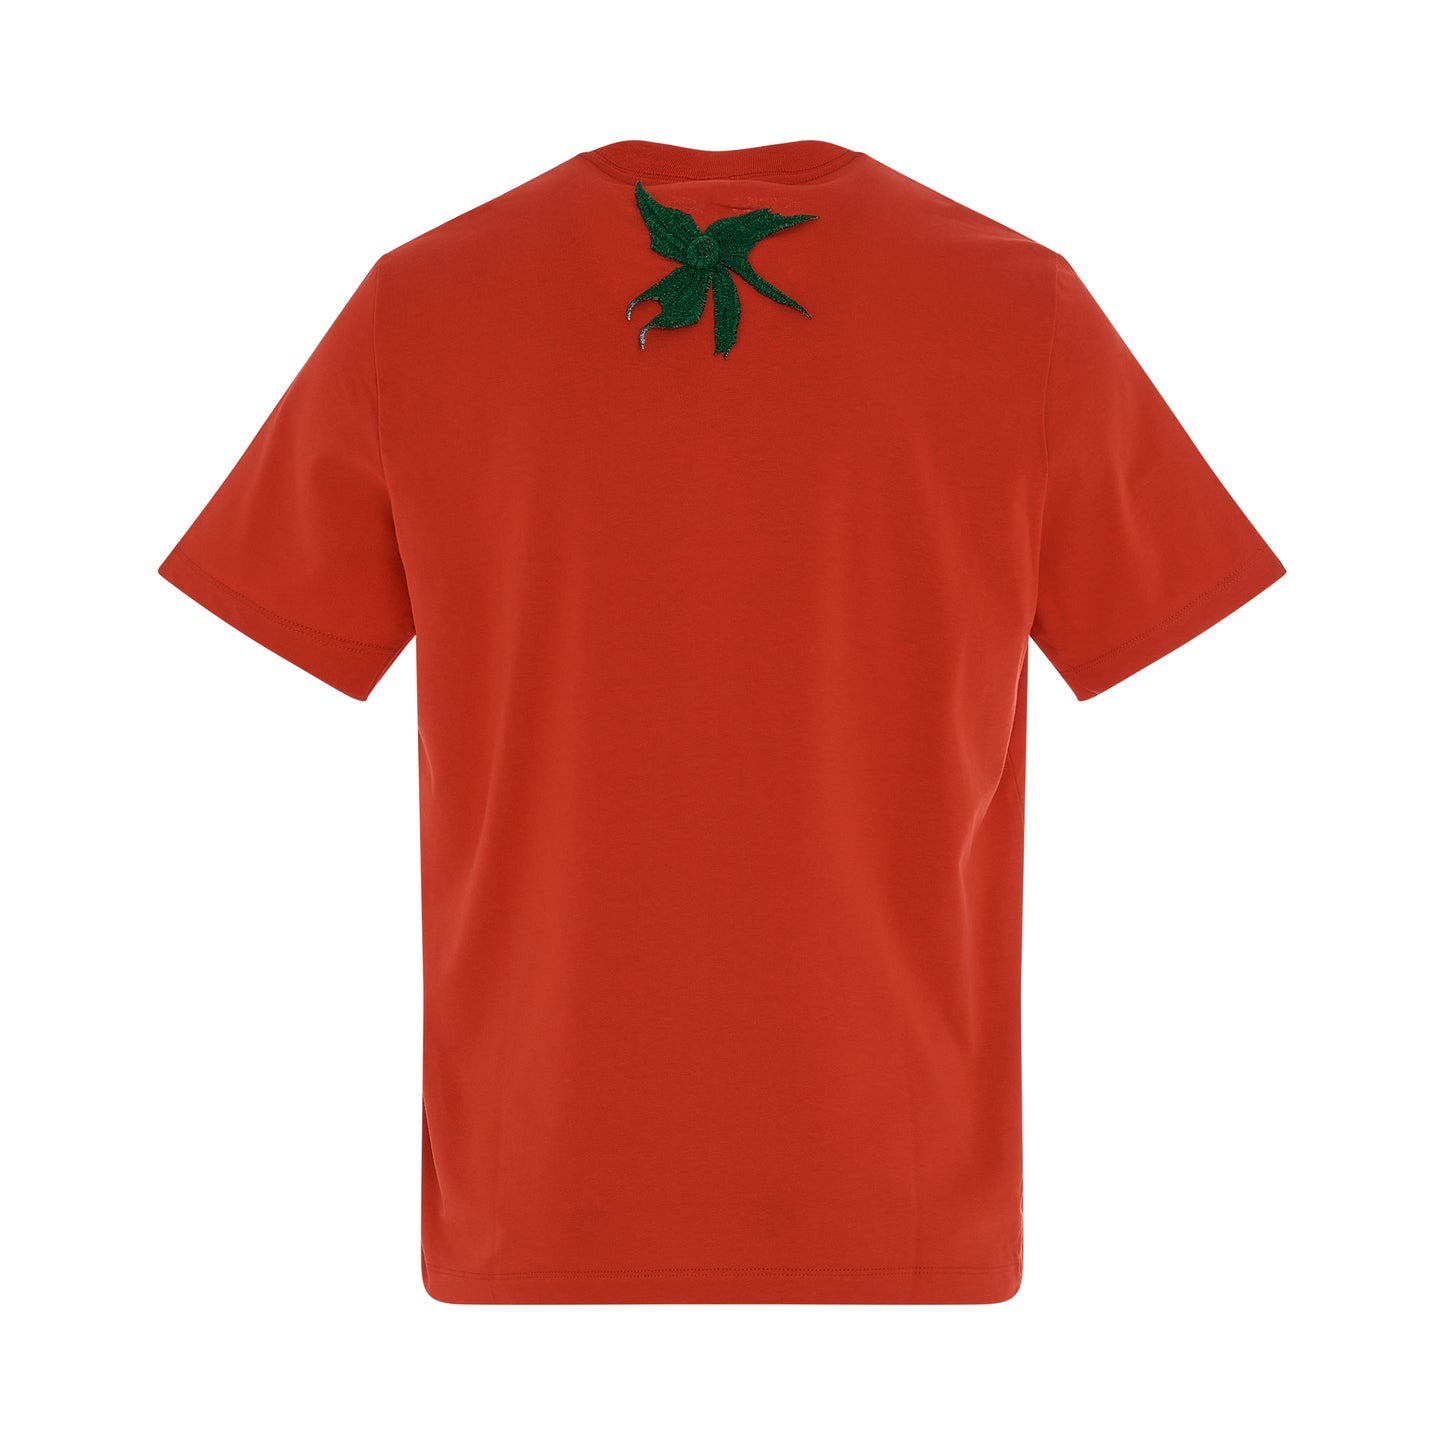 Vegetable Stem Embroidery T-Shirt in Tomato